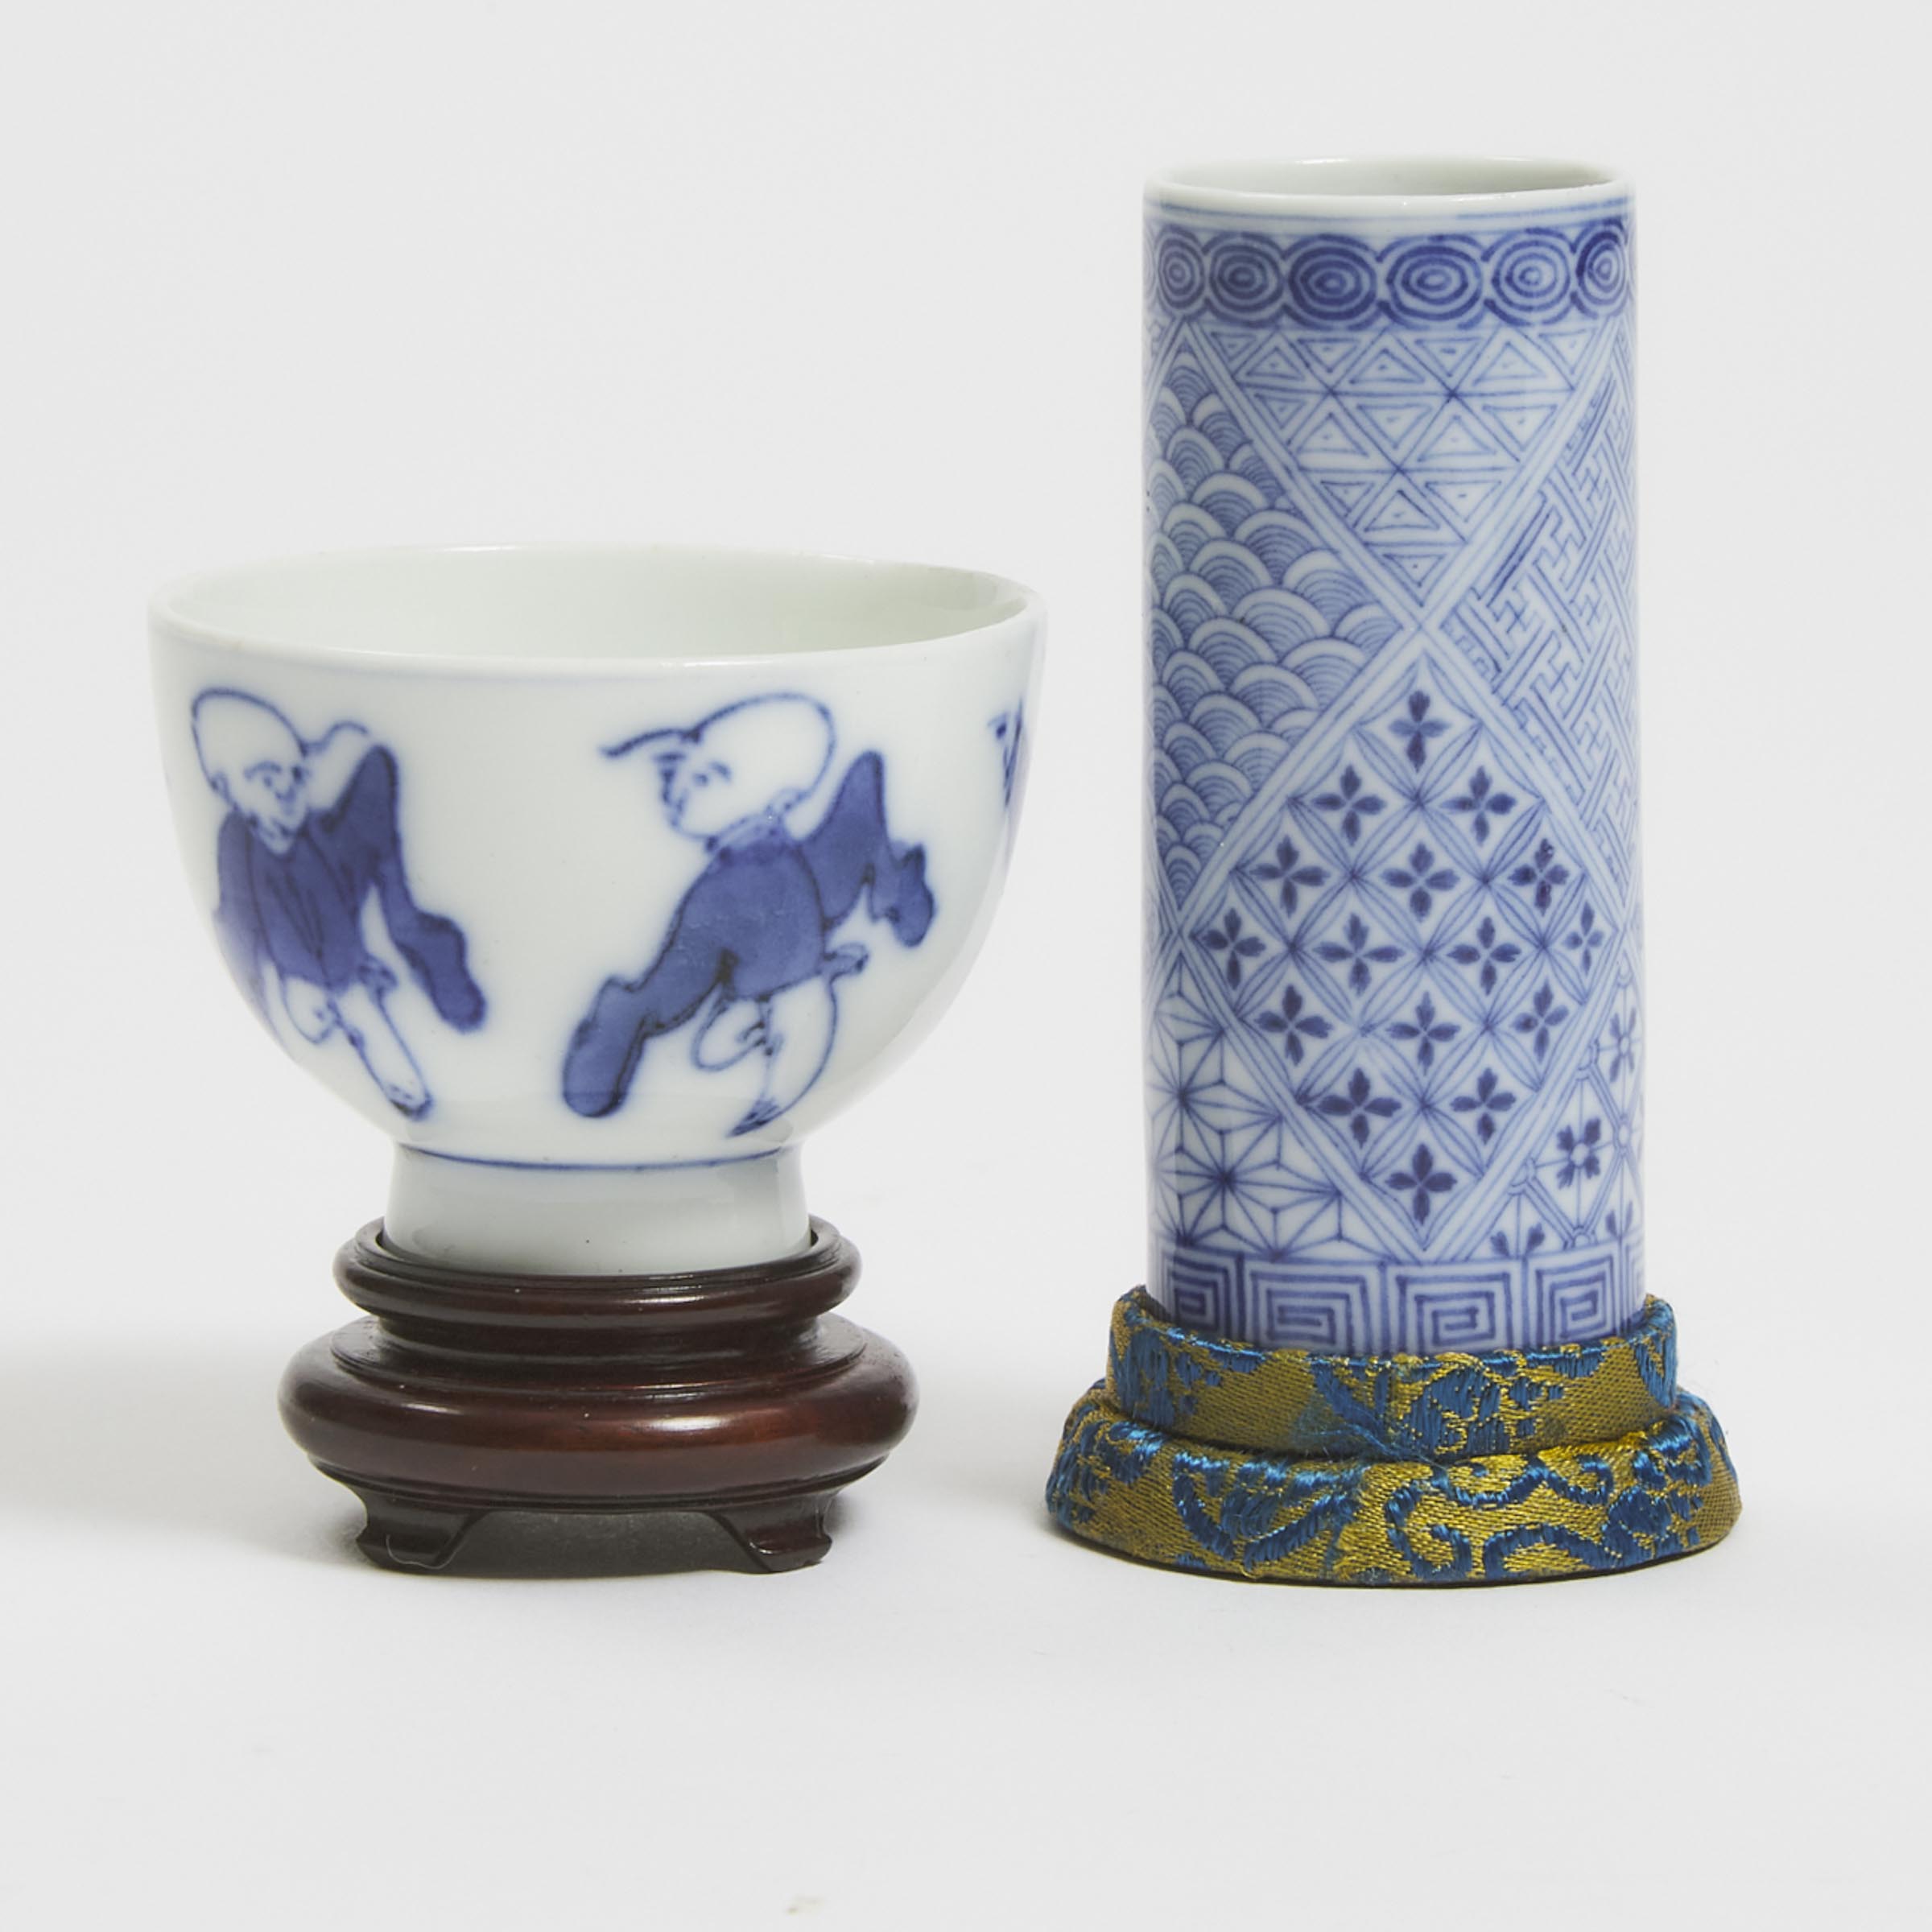 A Miniature Blue and White Cylindrical Brush Pot, Together With a Small Blue and White 'Boys' Cup, 19th Century